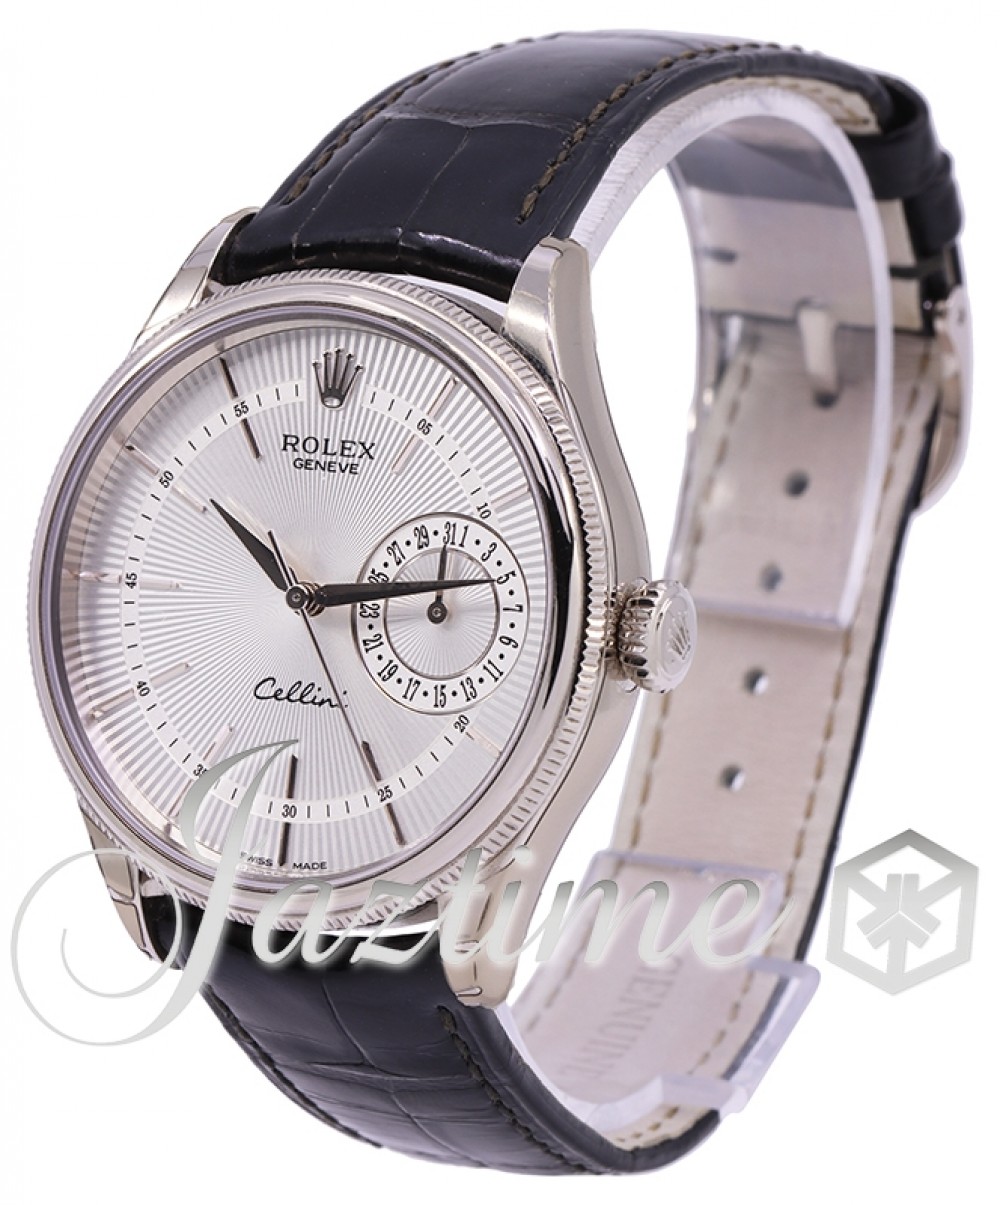 Rolex Cellini Date White Gold Silver Guilloche Index Dial Domed & Fluted  Double Bezel Black Leather Bracelet 50519 - BRAND NEW